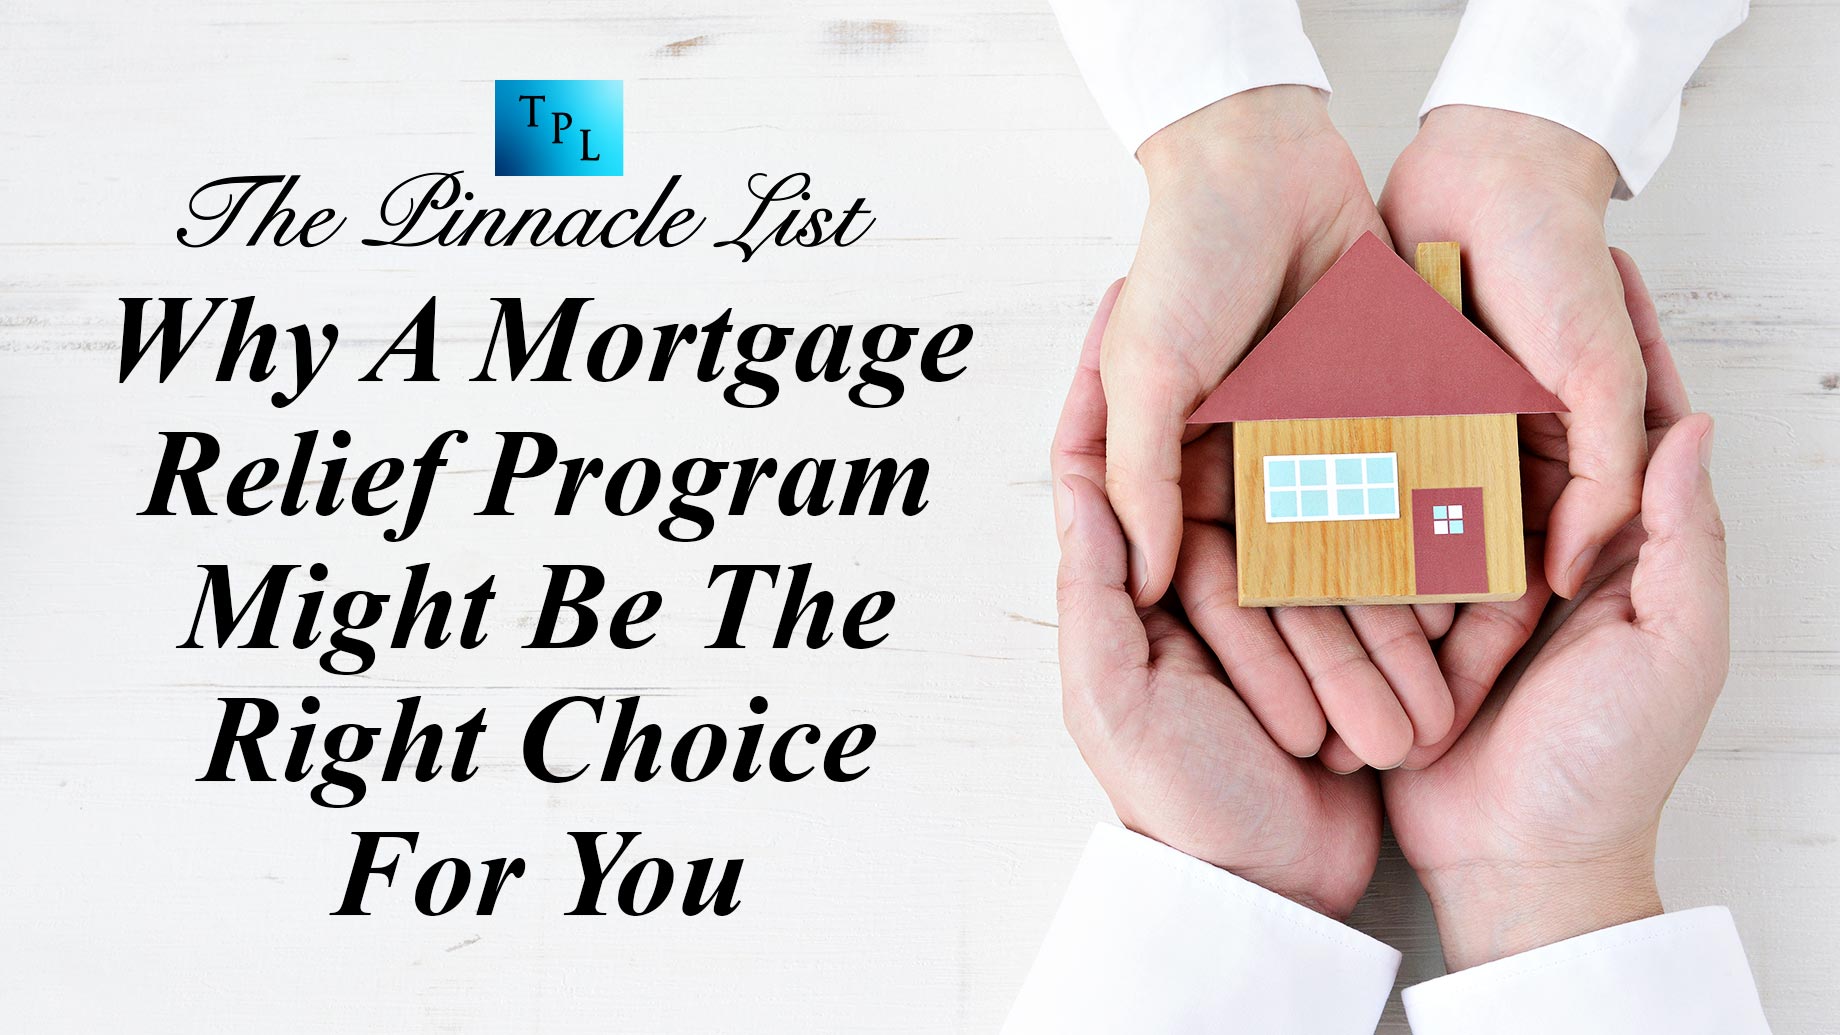 Why A Mortgage Relief Program Might Be The Right Choice For You